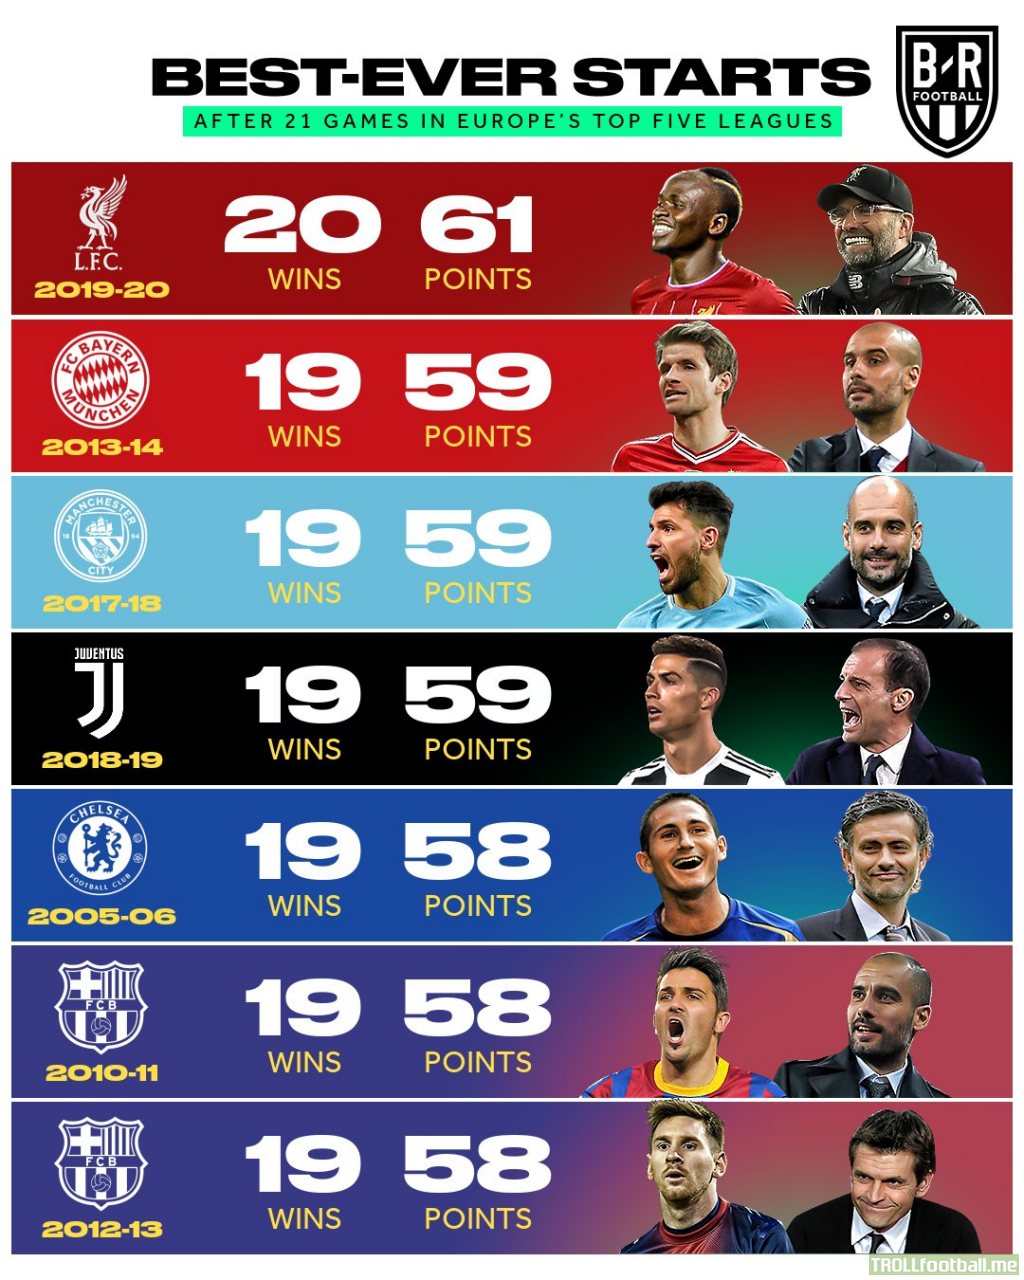 Liverpool have made the best-ever start to a season in Europe's top five leagues [ source B/R Football]